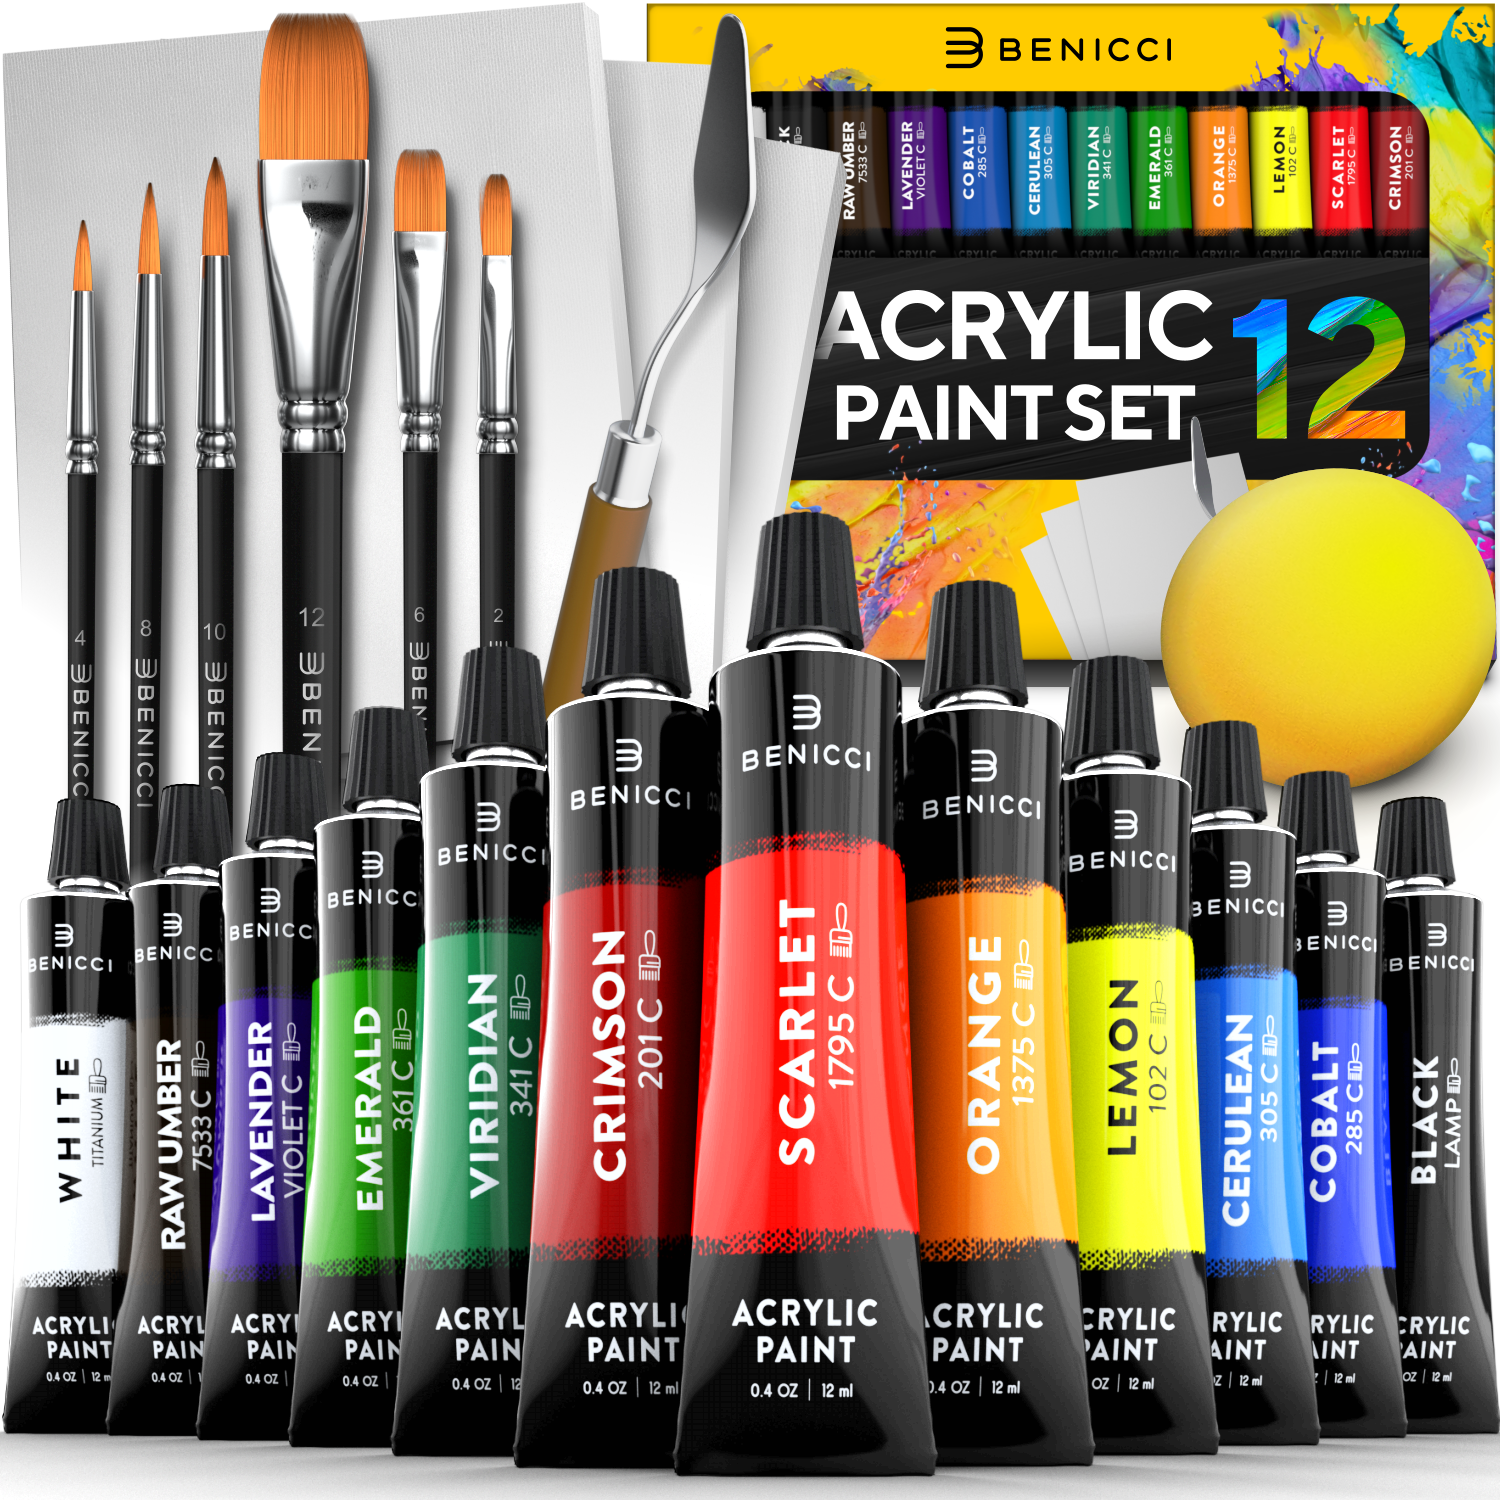 Premium Artist Paint Brush Set of 16 - Includes Palette Knife, Sponge & Organizing Case - Painting Brushes for Kids, Adults or Professionals - Perfect